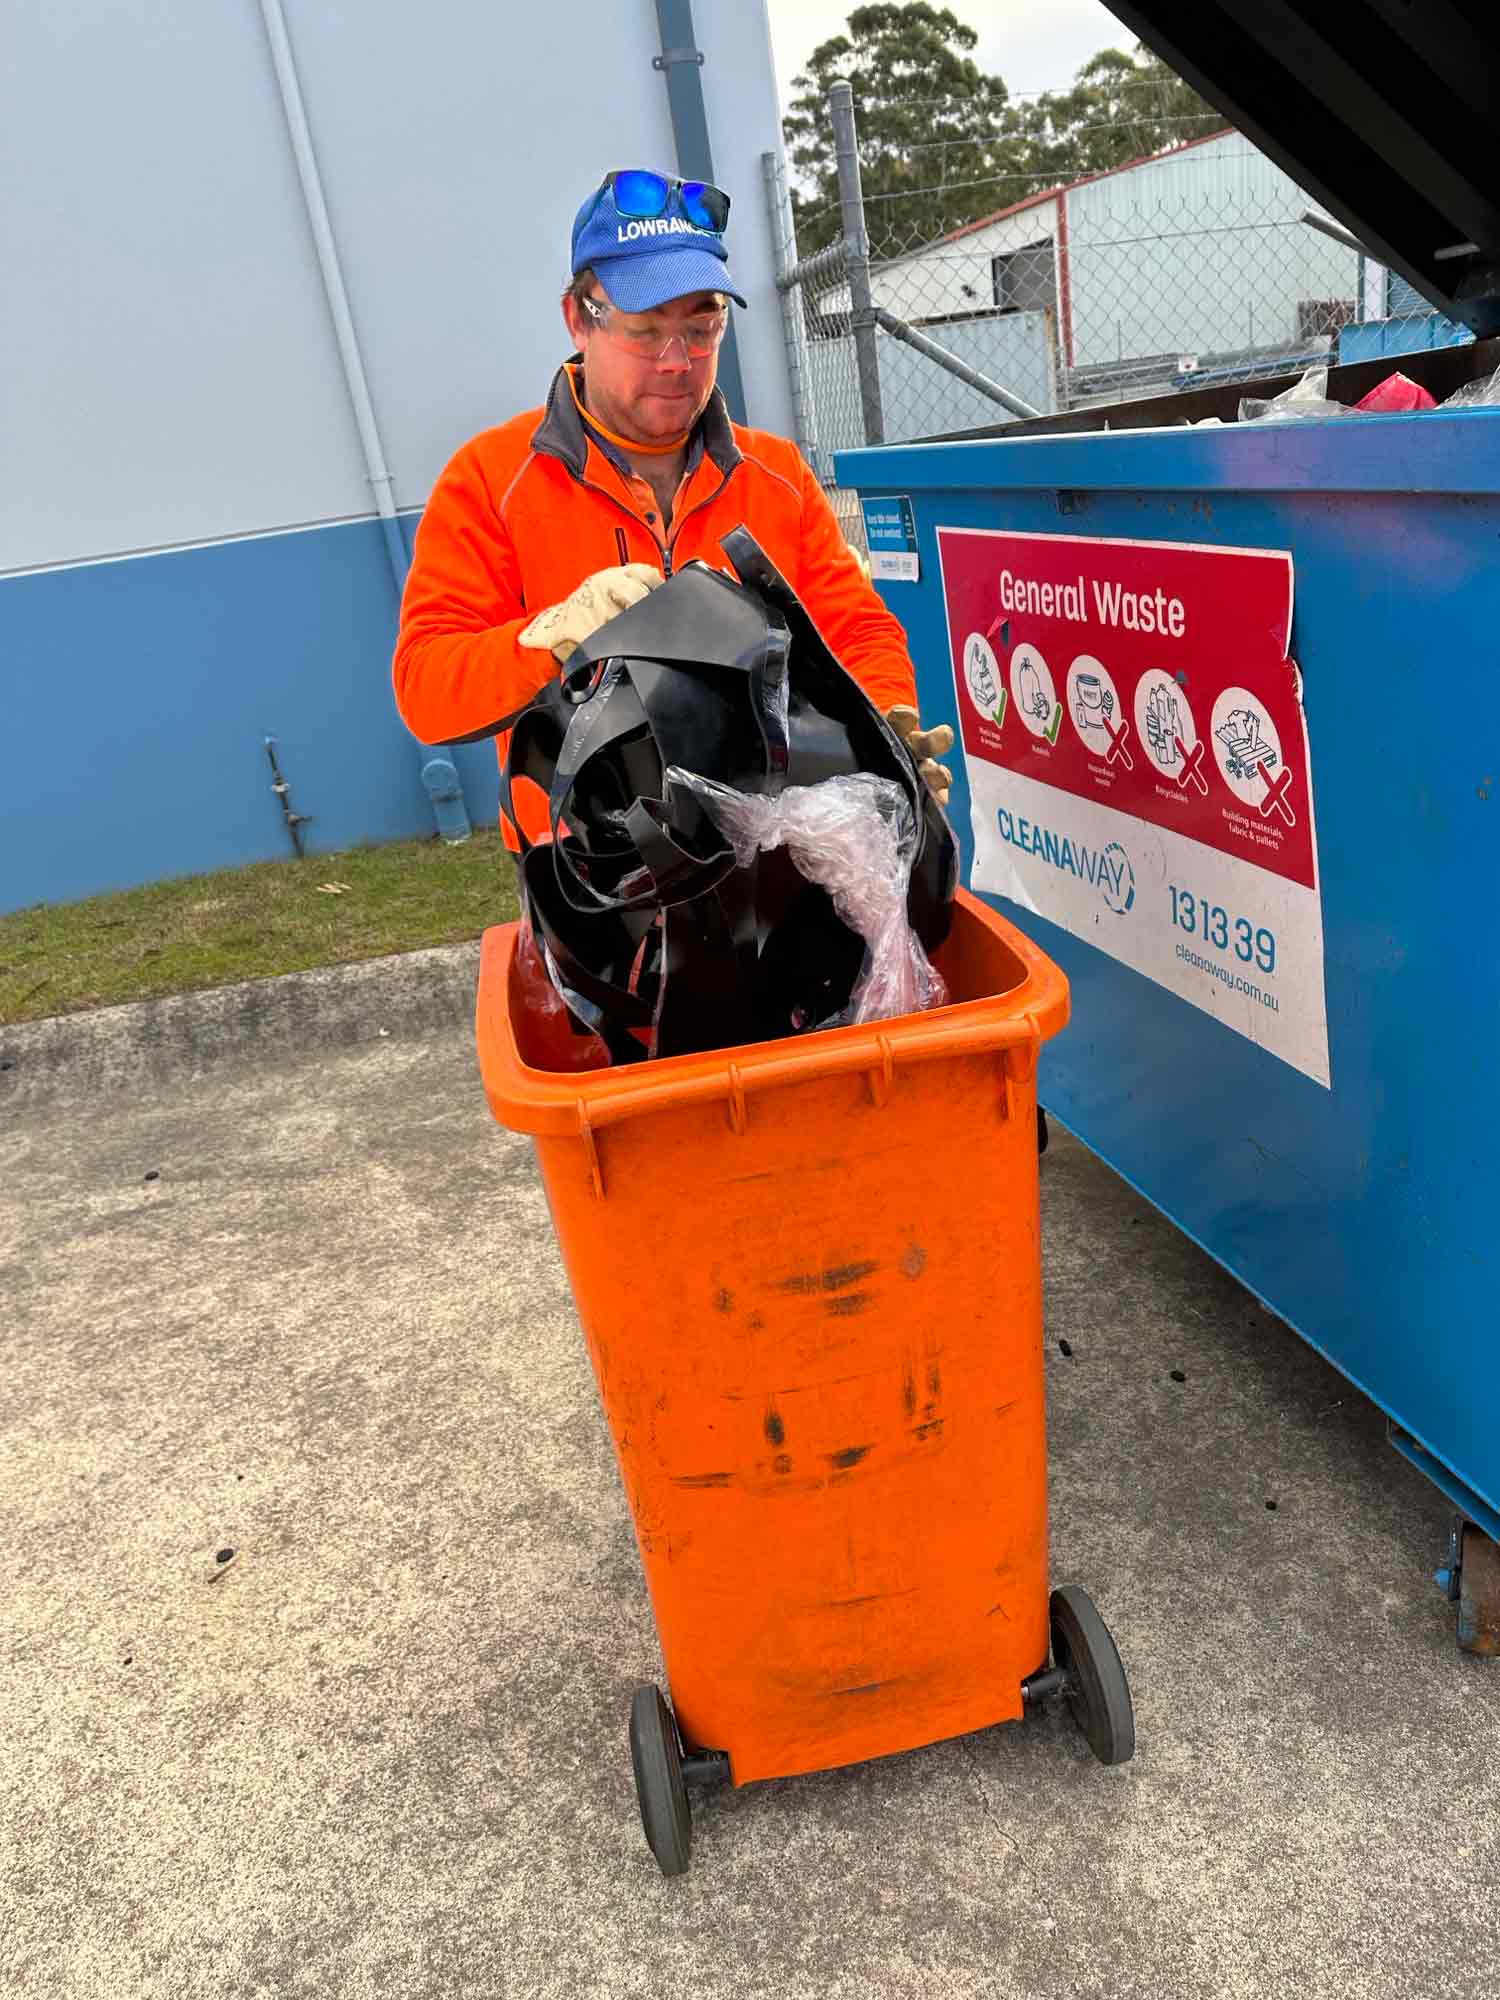 Man in high-vis throwing items from a wheelie bin into a dumpster.